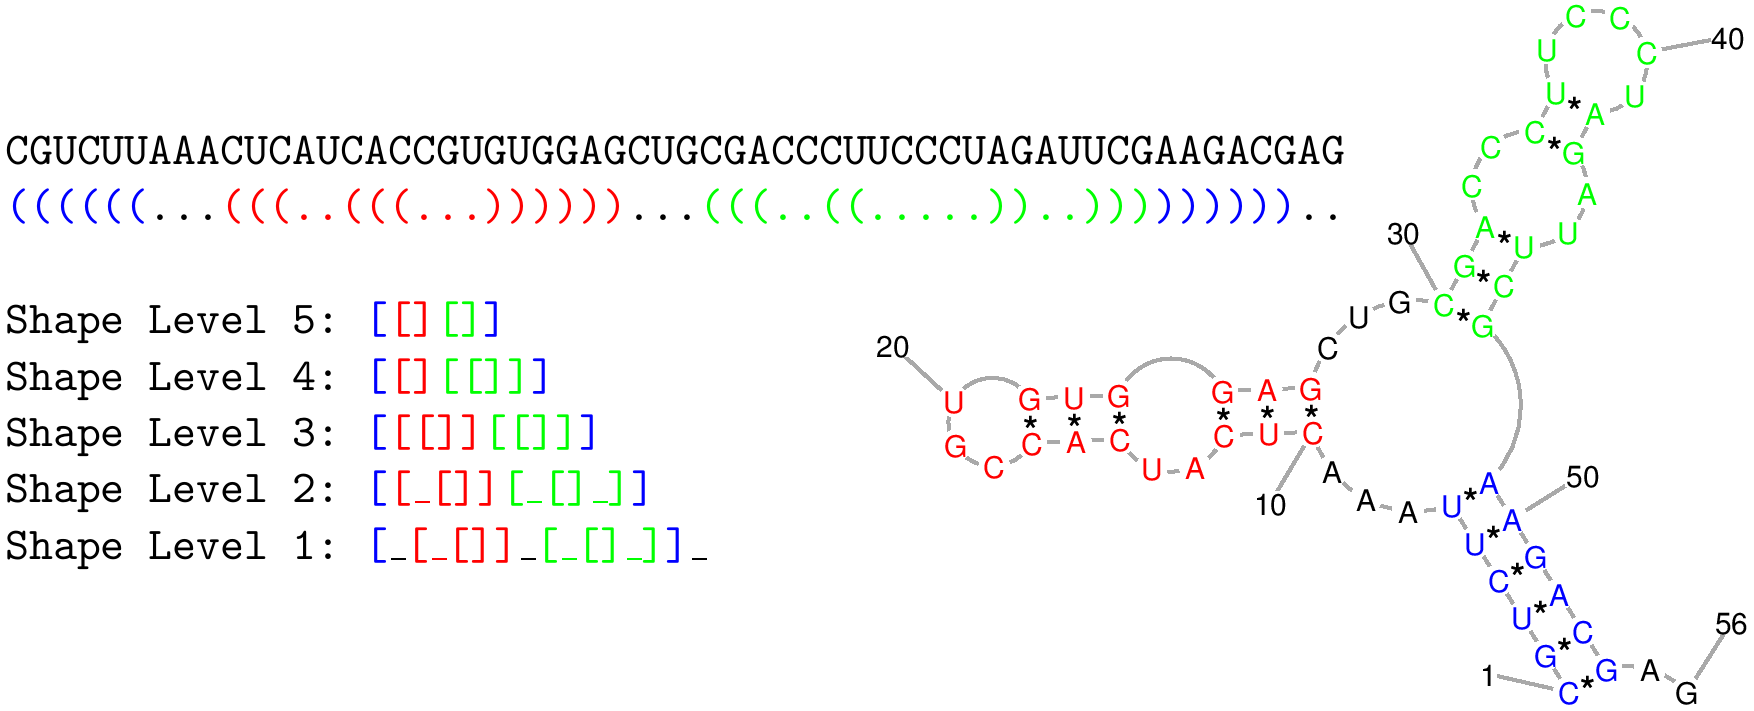 Illustration of one RNA shape and the levels of abstract representation.